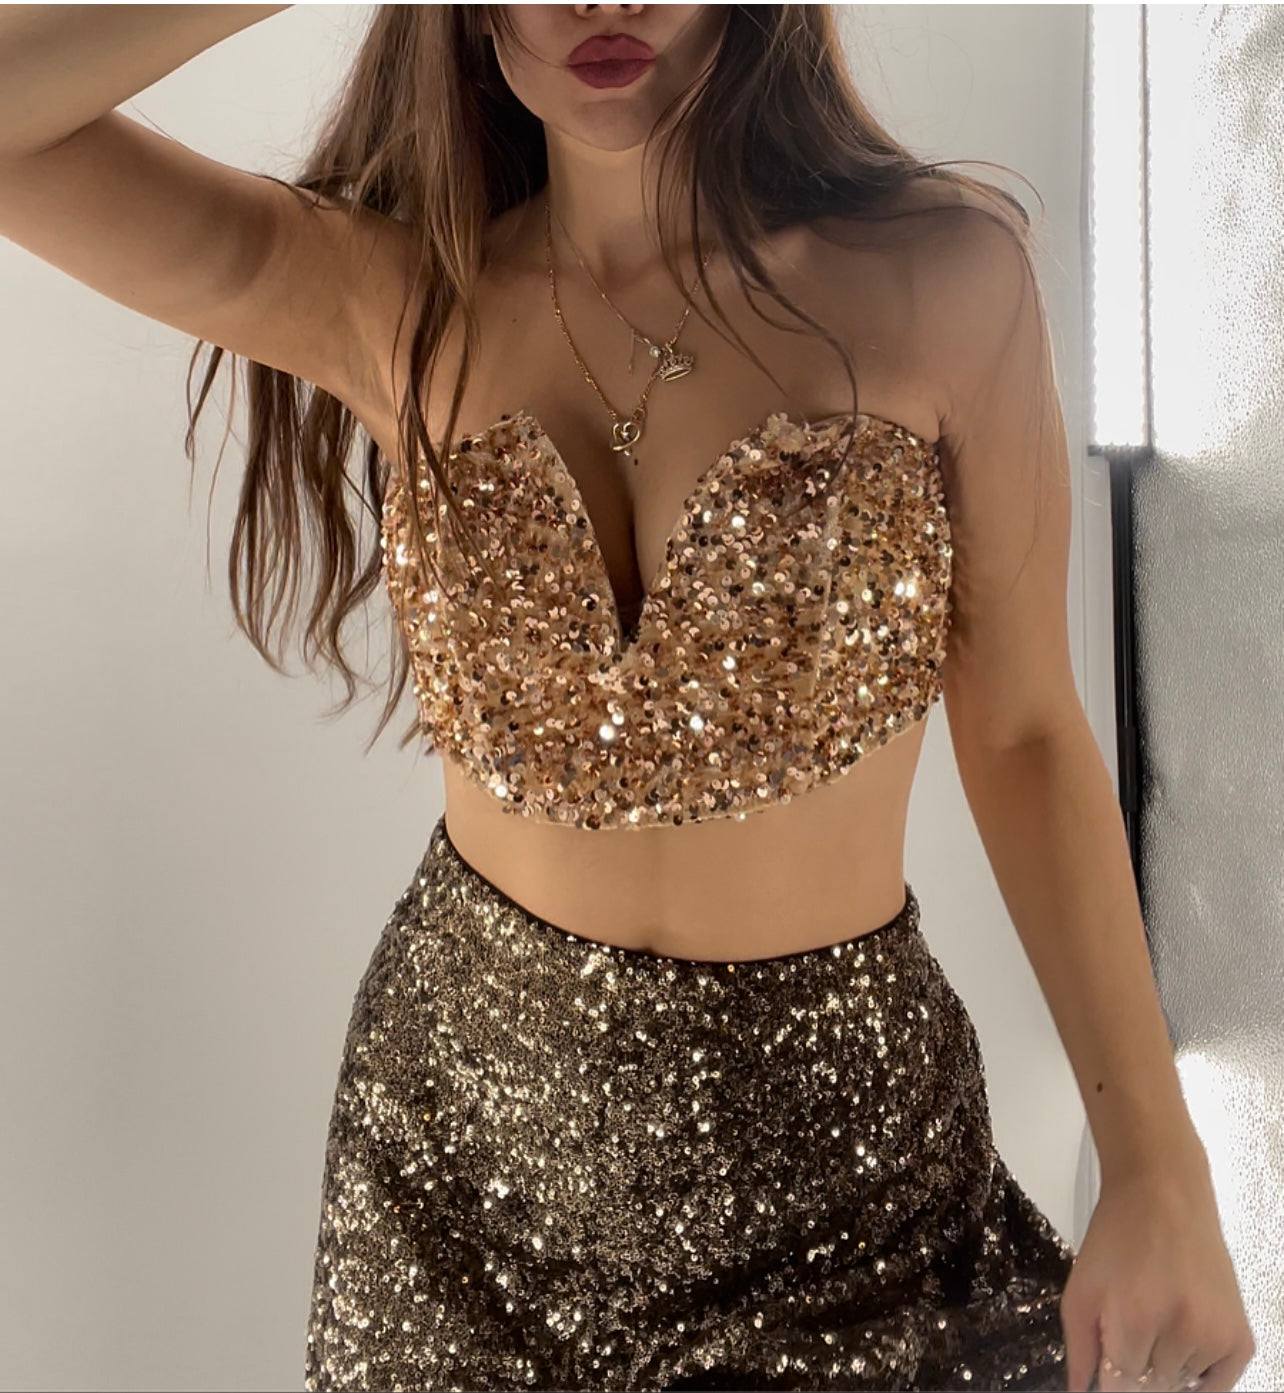 Urban Outfitters Gold Sequin Cropped Corset (Large)